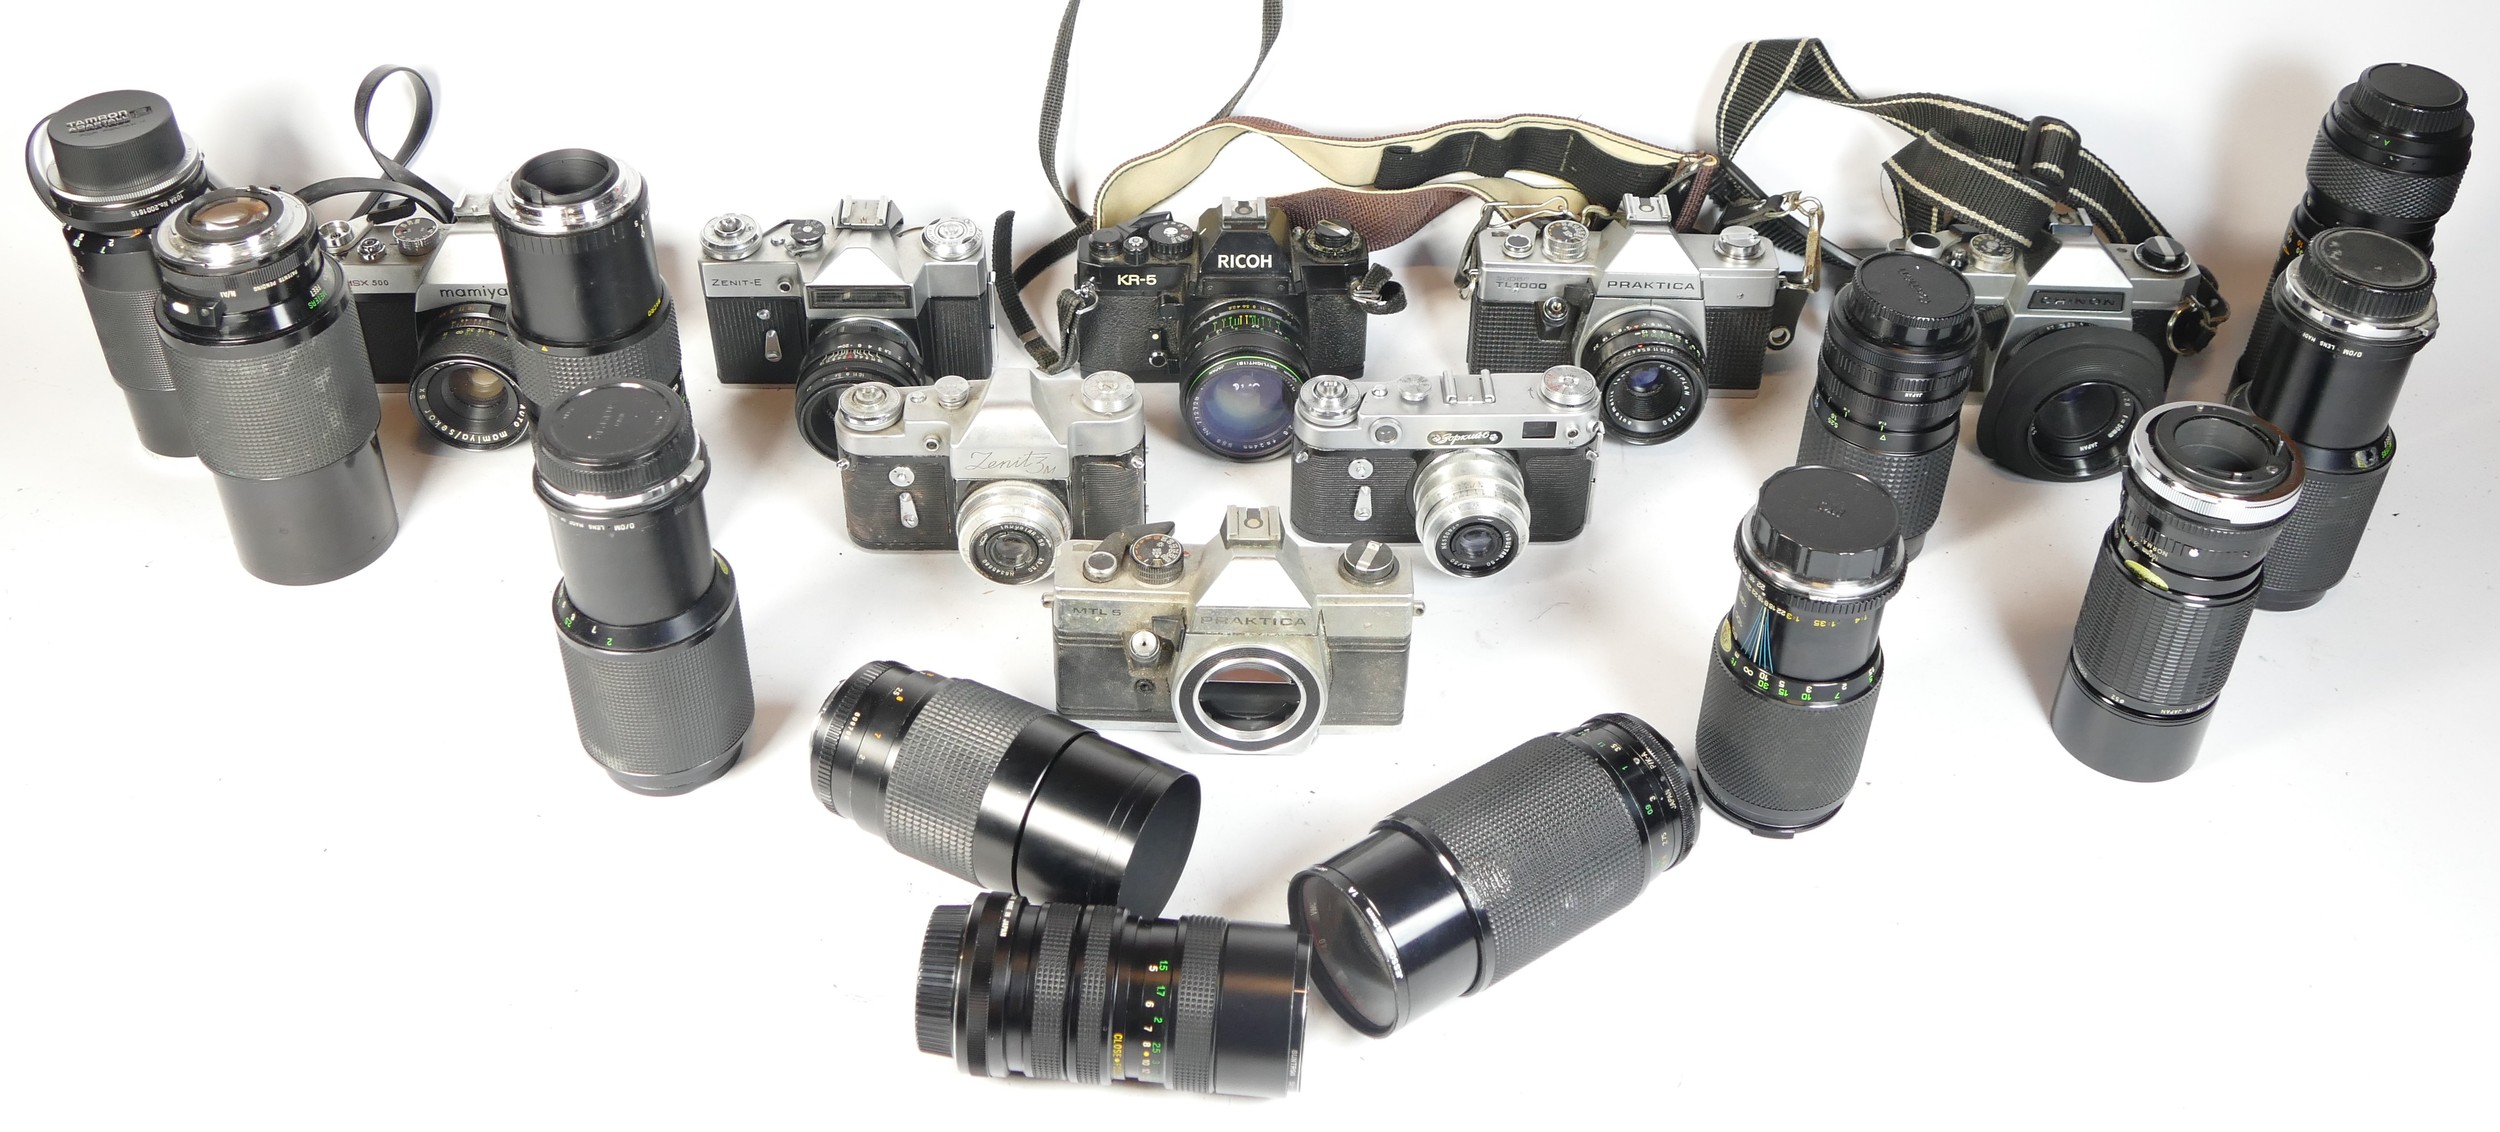 Eight SLR vintage film cameras to include a Mamiya MSX500, a Zenit 3m, a Praktica MTLS and a